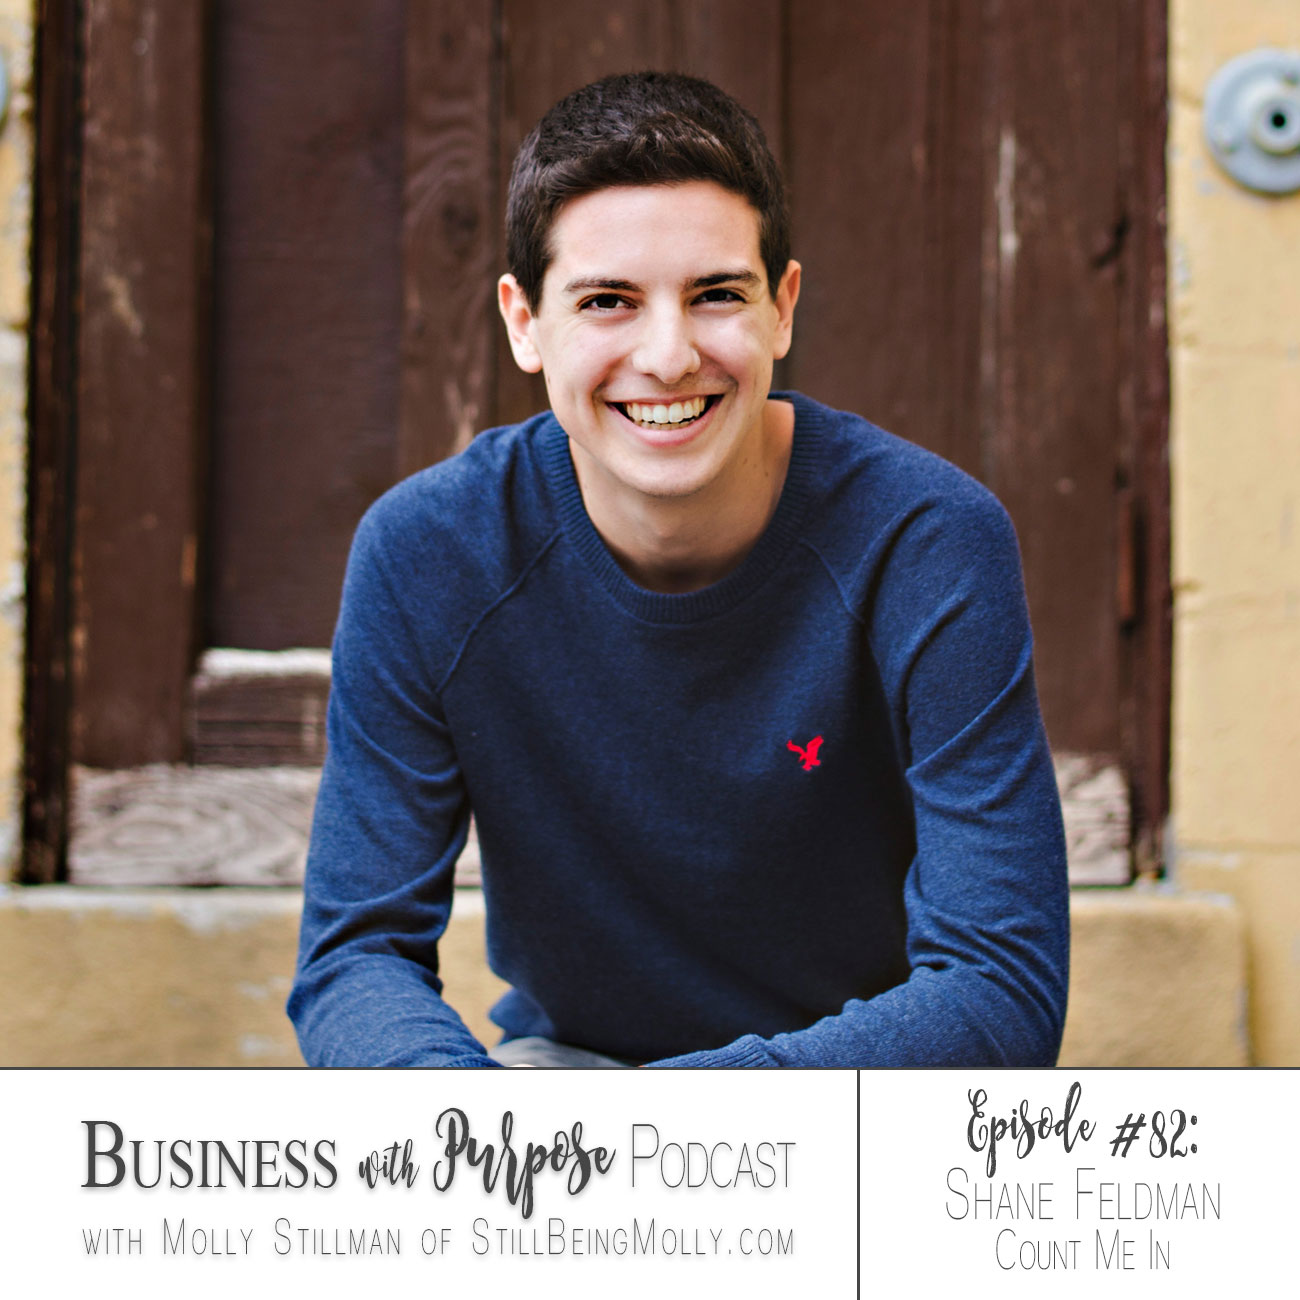 Business with Purpose Podcast EP 82: Shane Feldman, Founder and CEO of Count Me In by popular North Carolina ethical blogger Still Being Molly